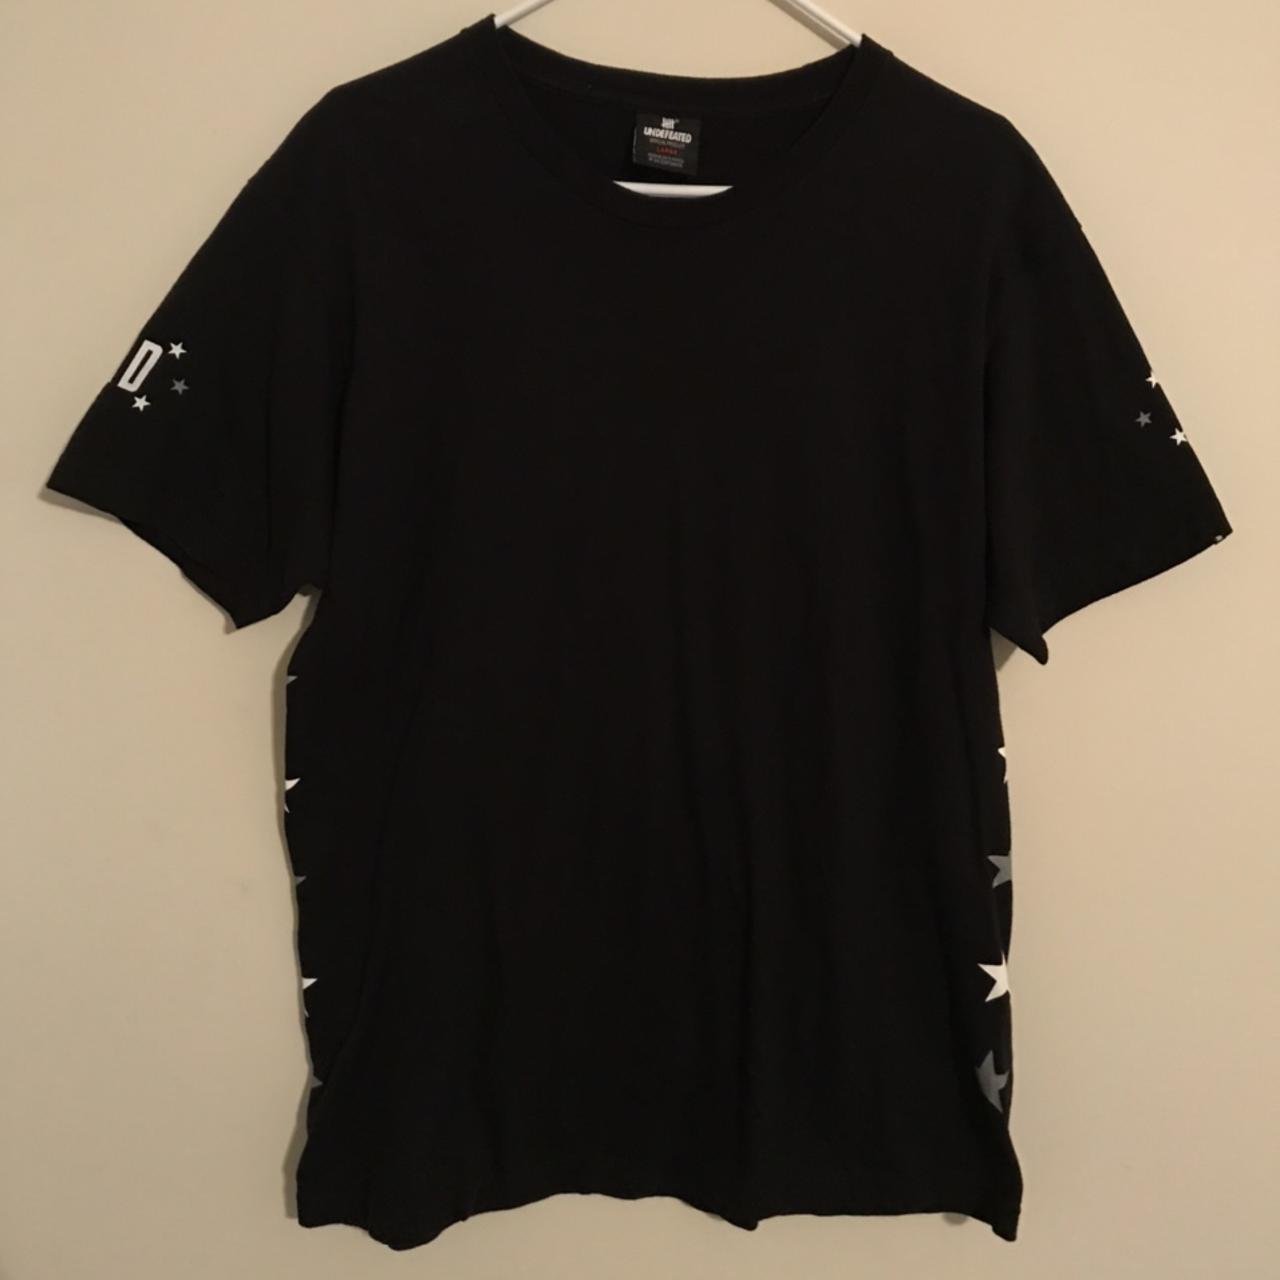 Undefeated Men's Black and White T-shirt (2)